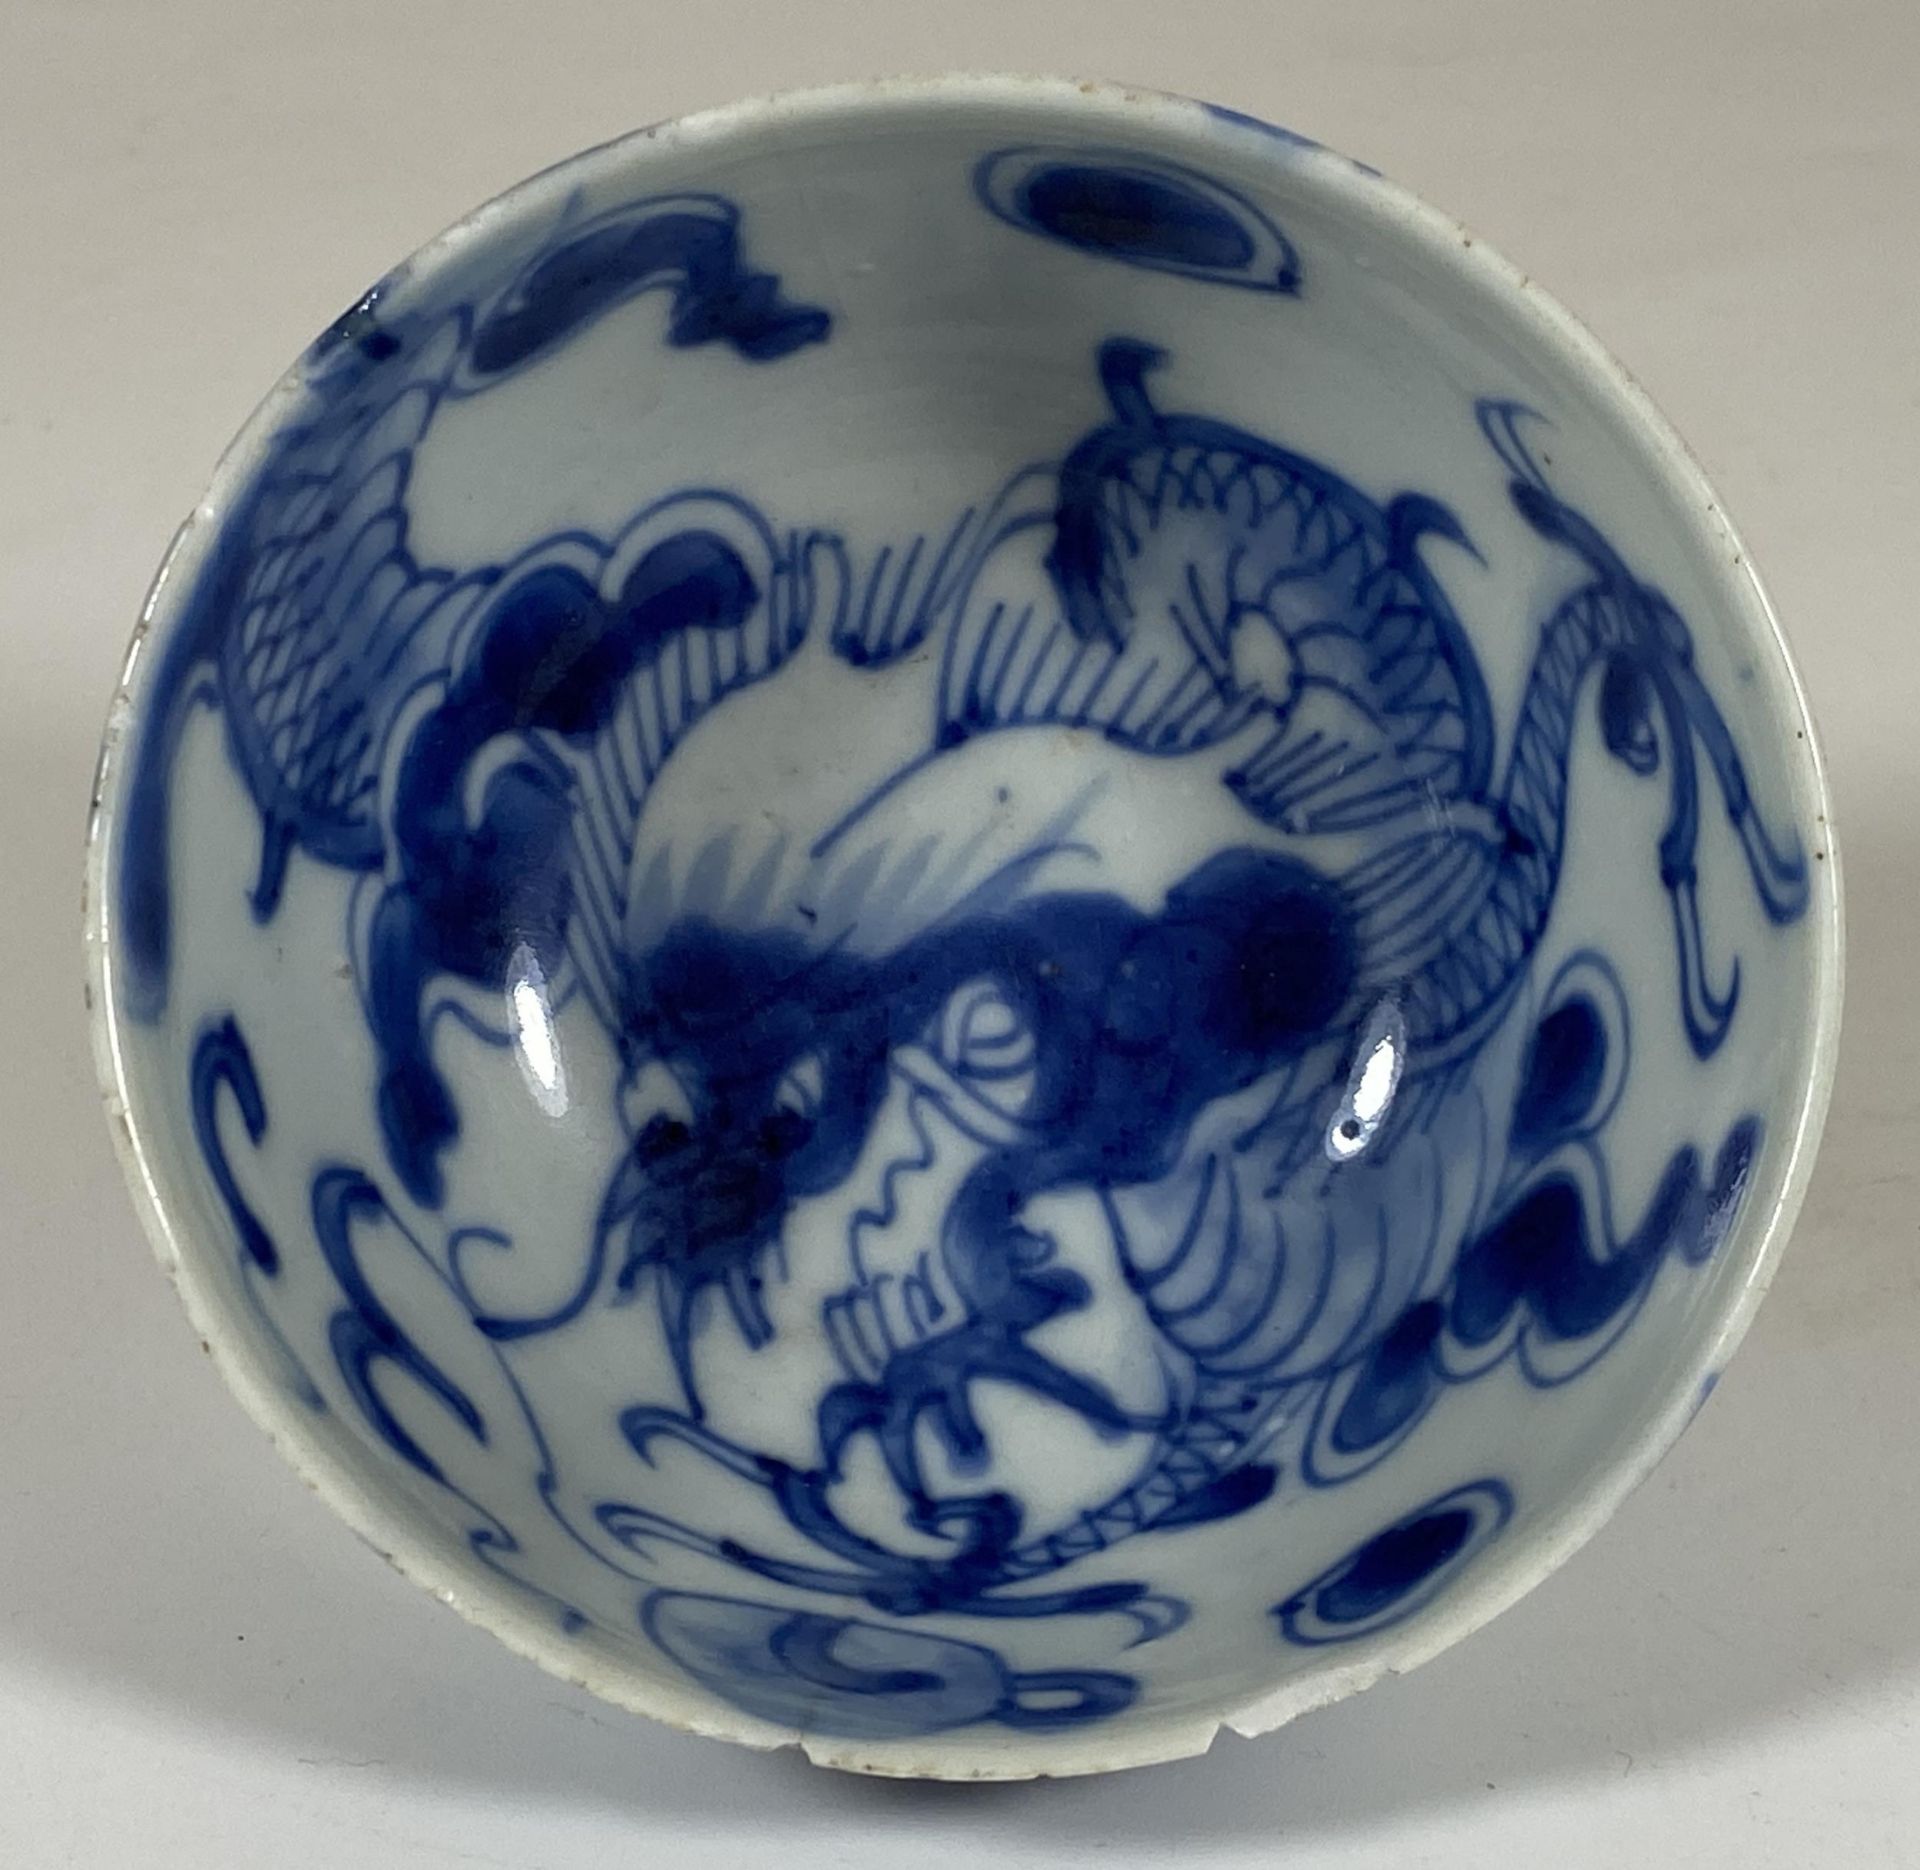 A 19TH CENTURY CHINESE BLUE AND WHITE PORCELAIN DRAGON CROSSING THE WALL DESIGN BOWL, MARKED TO